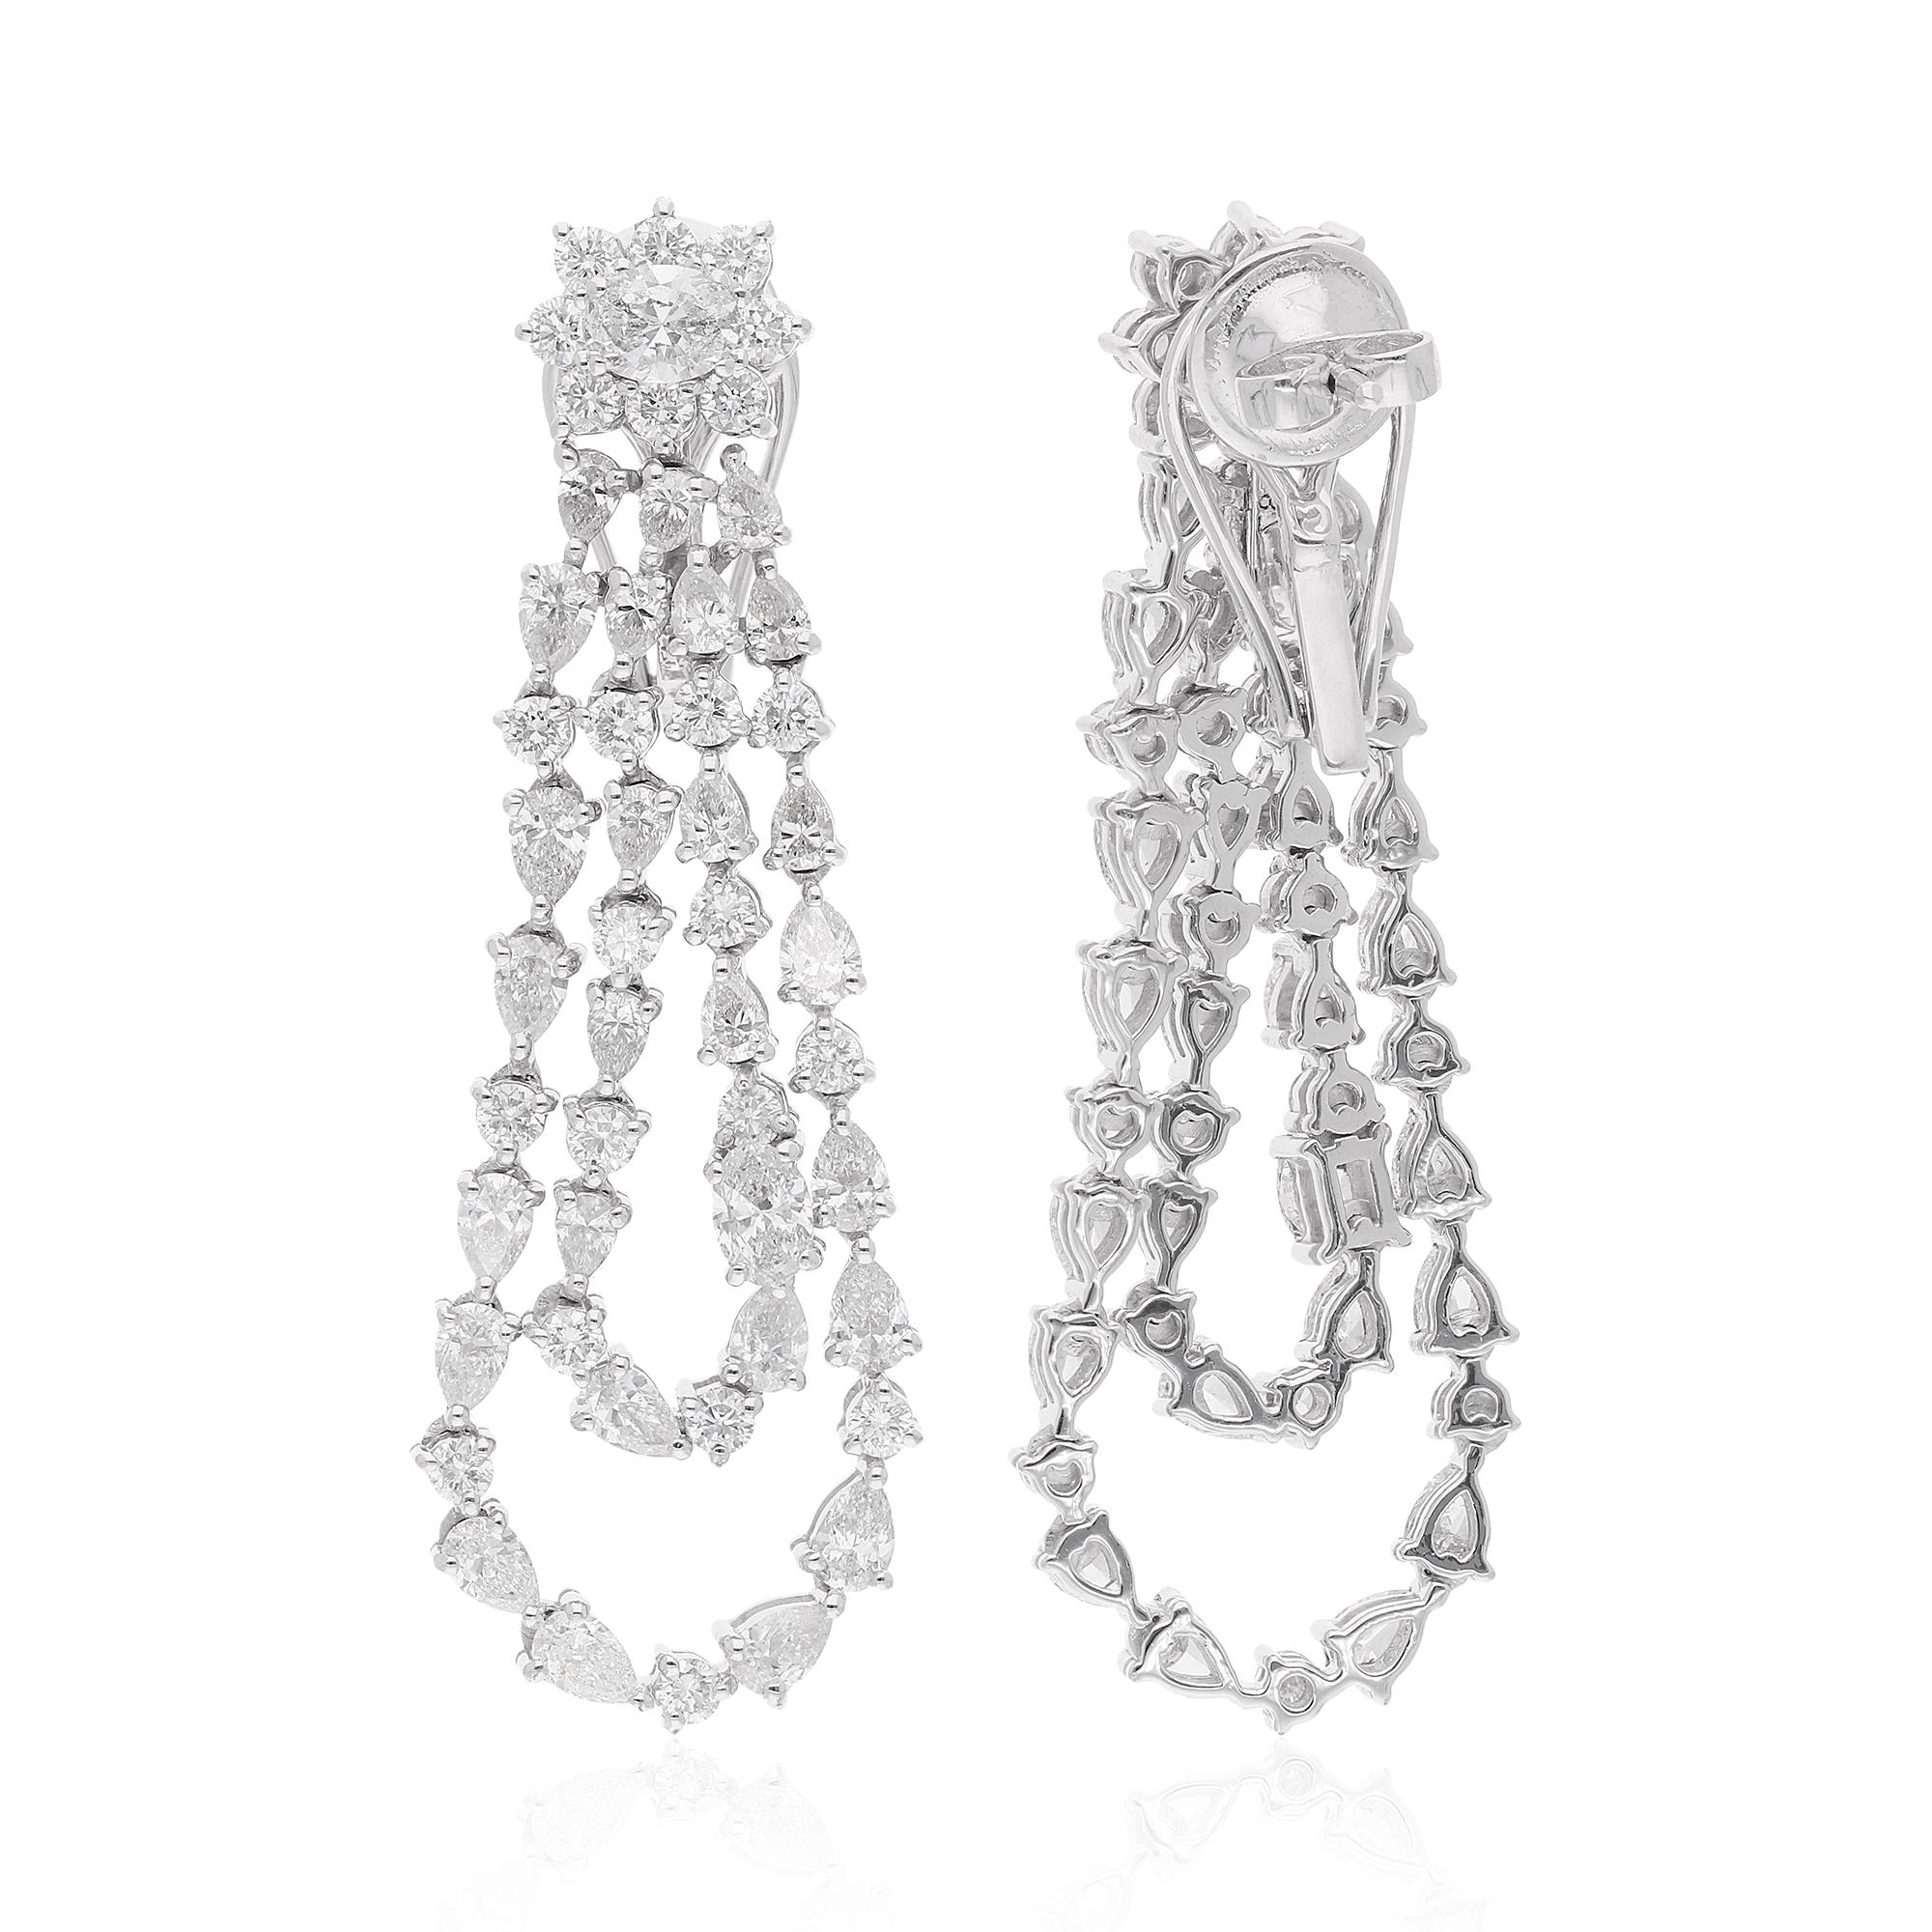 Set in luxurious 18 karat white gold, the diamonds radiate with unparalleled brilliance, enhanced by the purity and luminosity of the precious metal. The sophisticated dangle design adds movement and allure to the earrings, ensuring they catch the